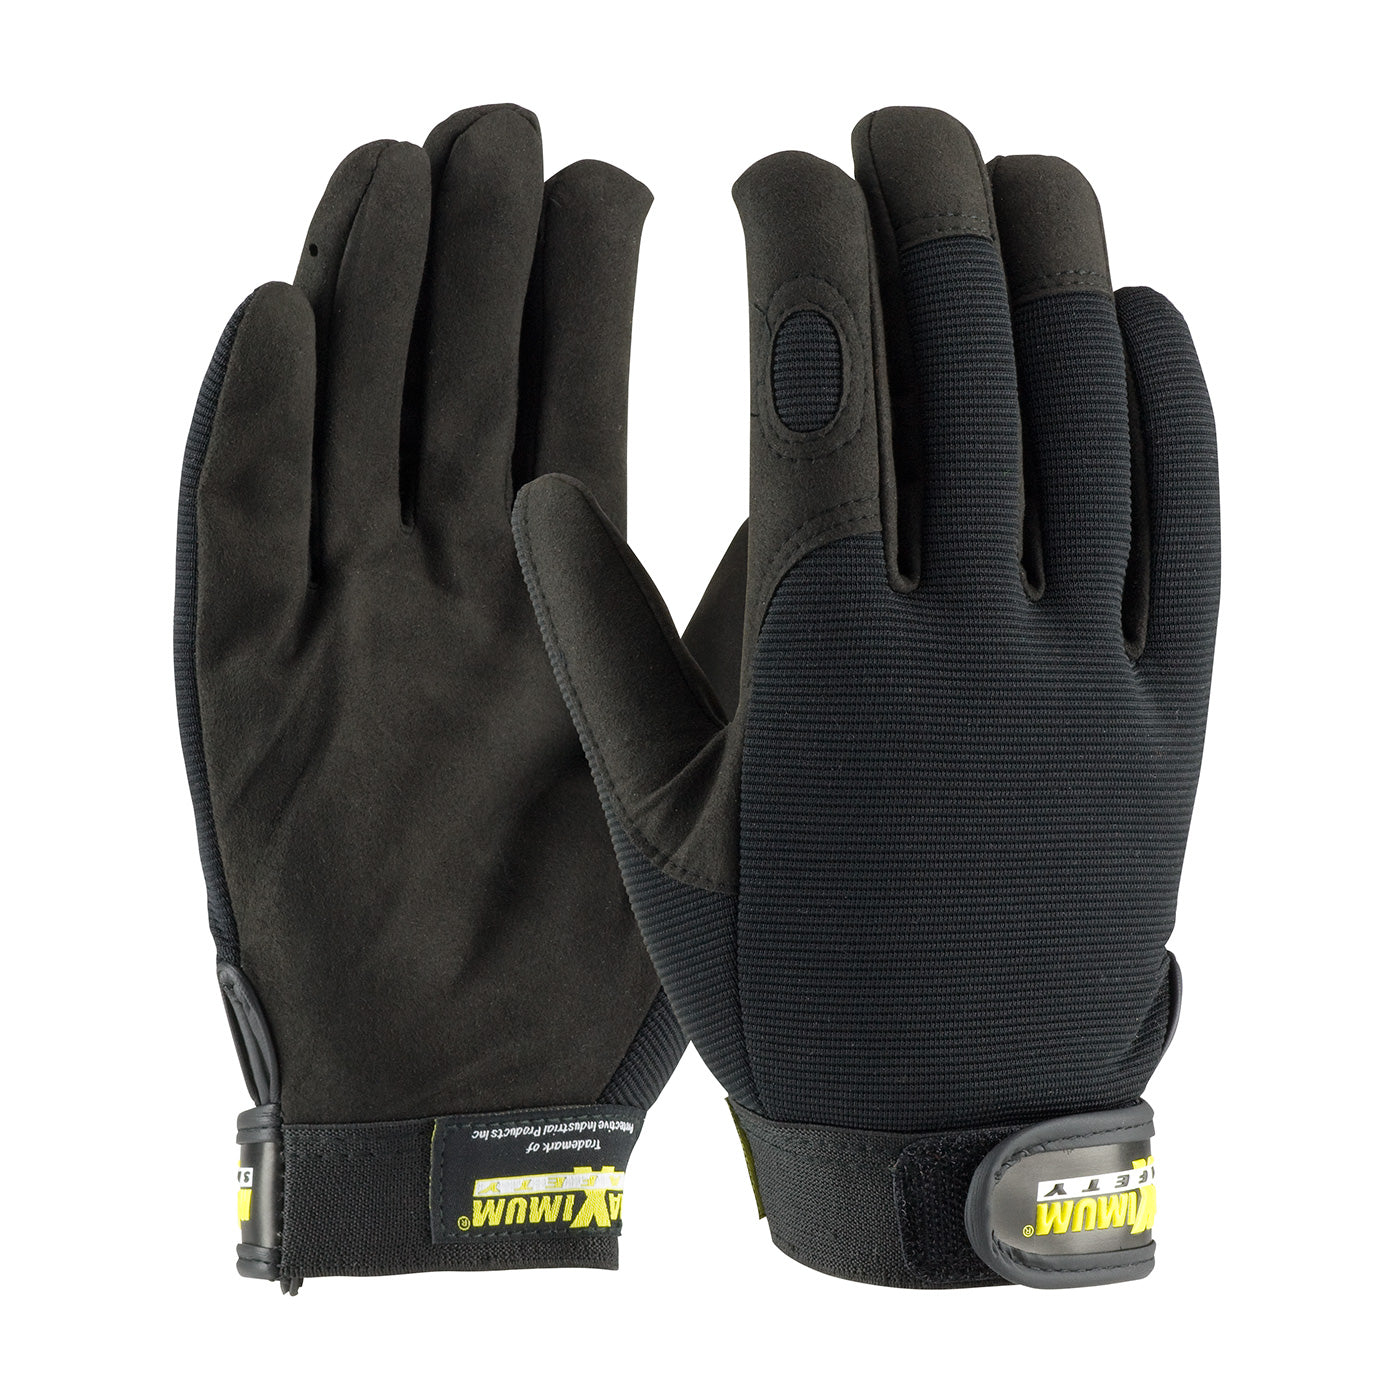 Maximum Safety® Professional Black Mechanic's Glove Work Gloves and Hats - Cleanflow